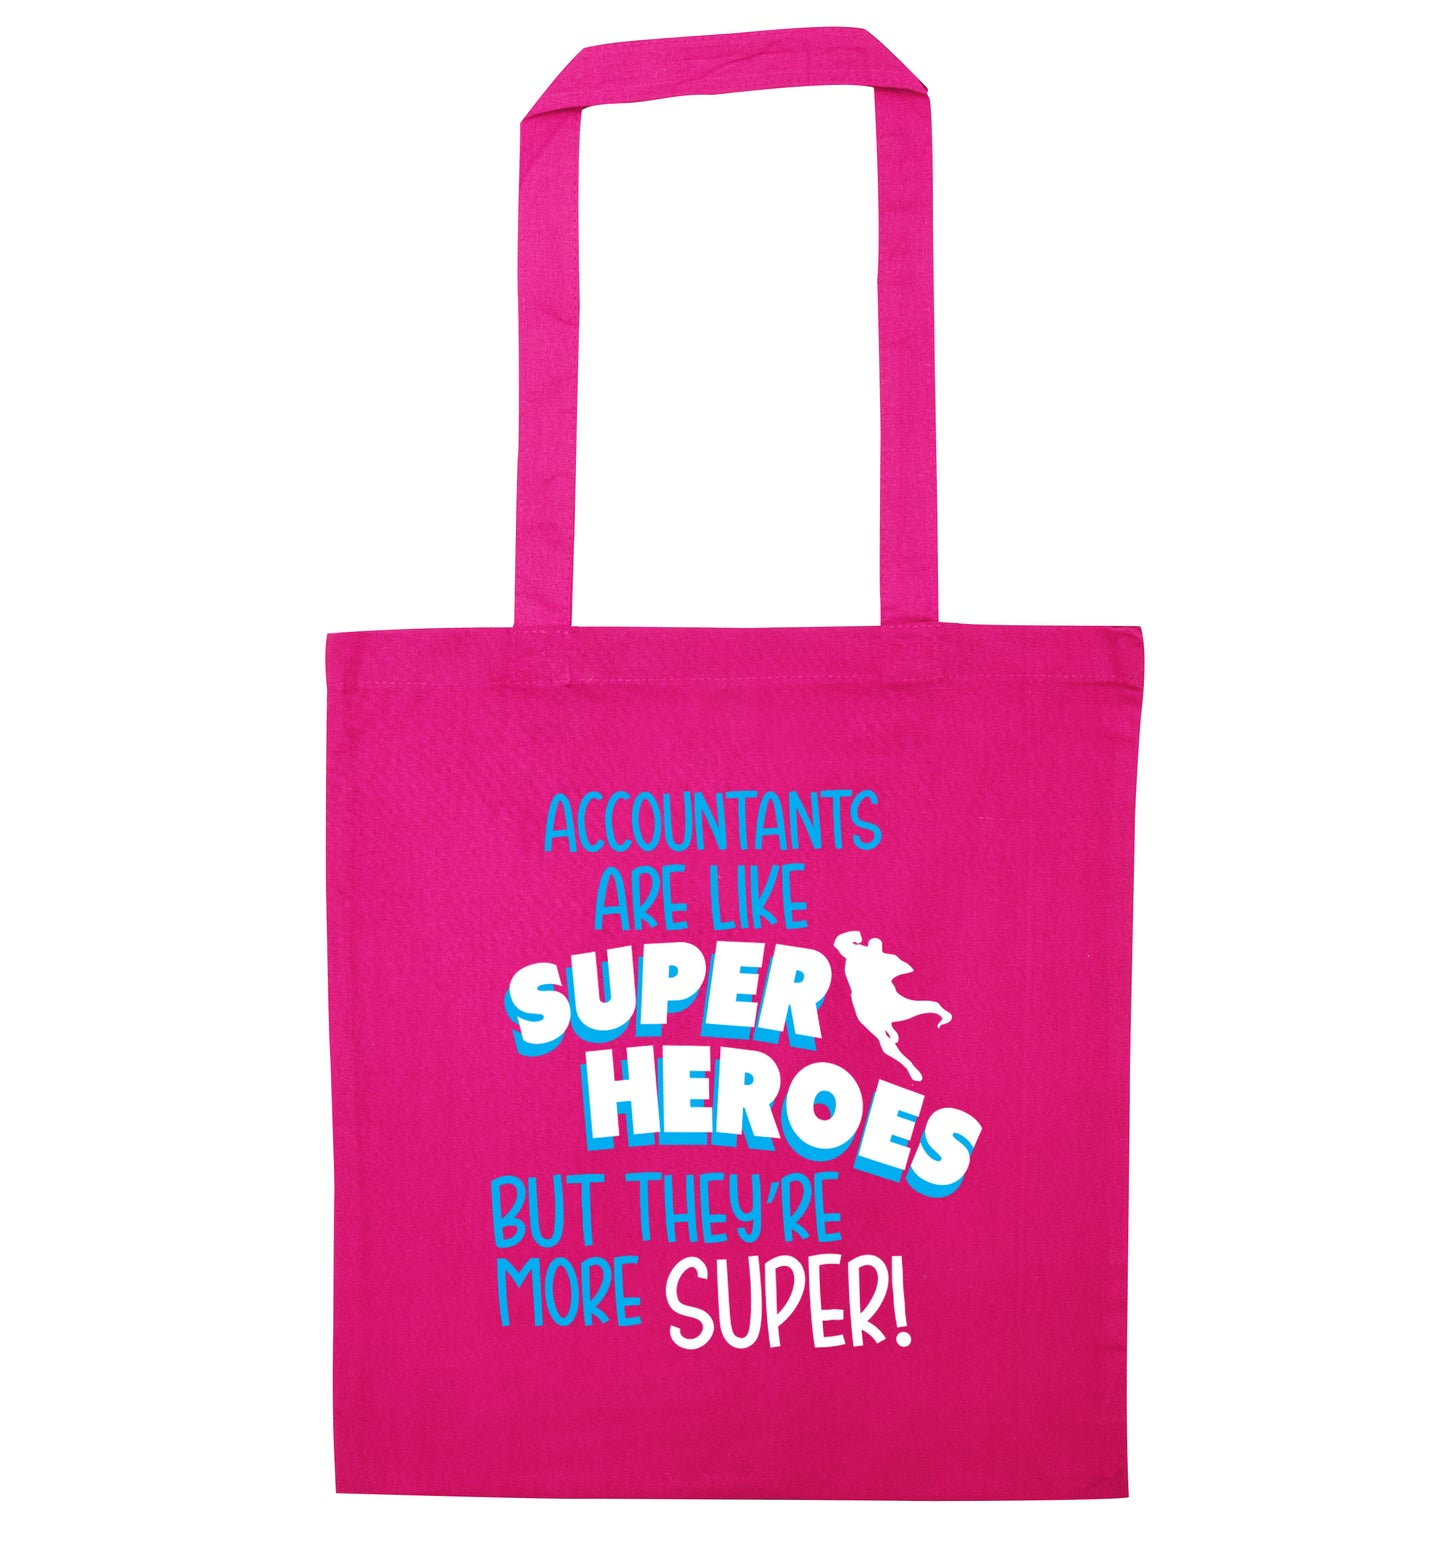 Accountants are like superheroes but they're more super pink tote bag